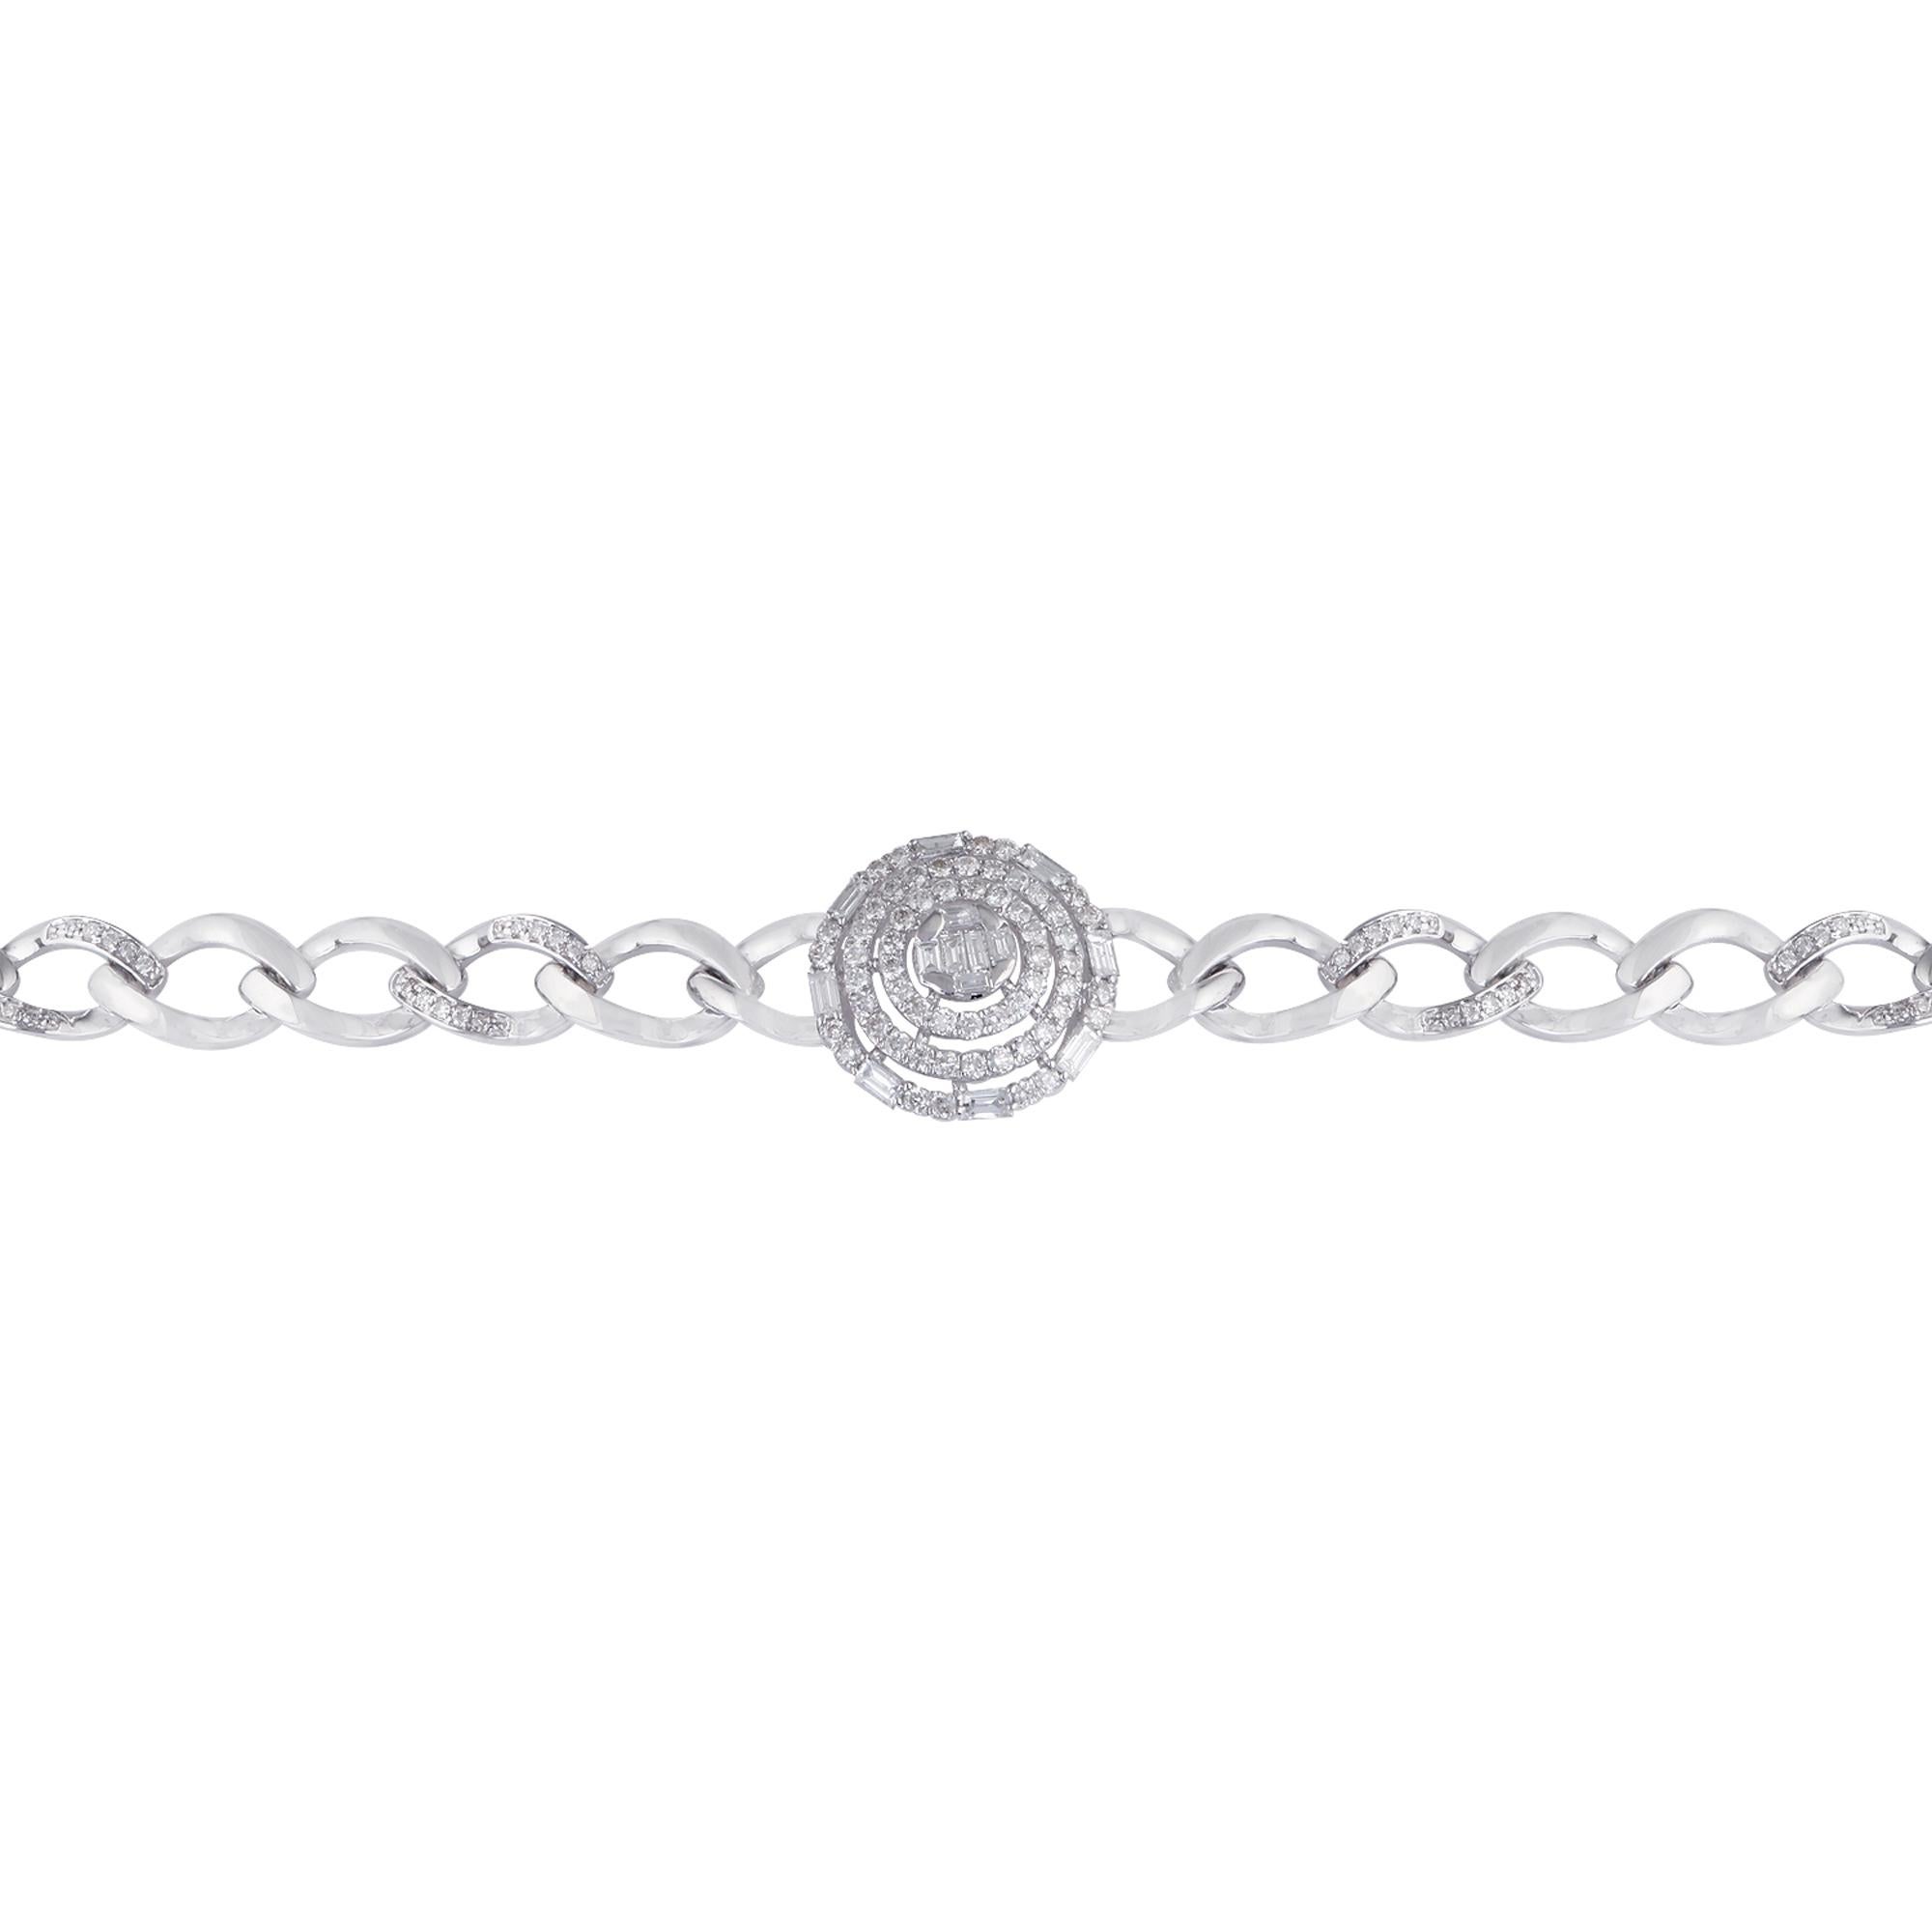 Item Code :- CN-26243 (14k)
Gross Wt. :- 10.72 gm
14k Solid White Gold Wt. :- 10.50 gm
Natural Diamond Wt. :- 1.10 Ct. ( AVERAGE DIAMOND CLARITY SI1-SI2 & COLOR H-I )
Bracelet Length :- 7 Inch

✦ Sizing
.....................
We can adjust most items